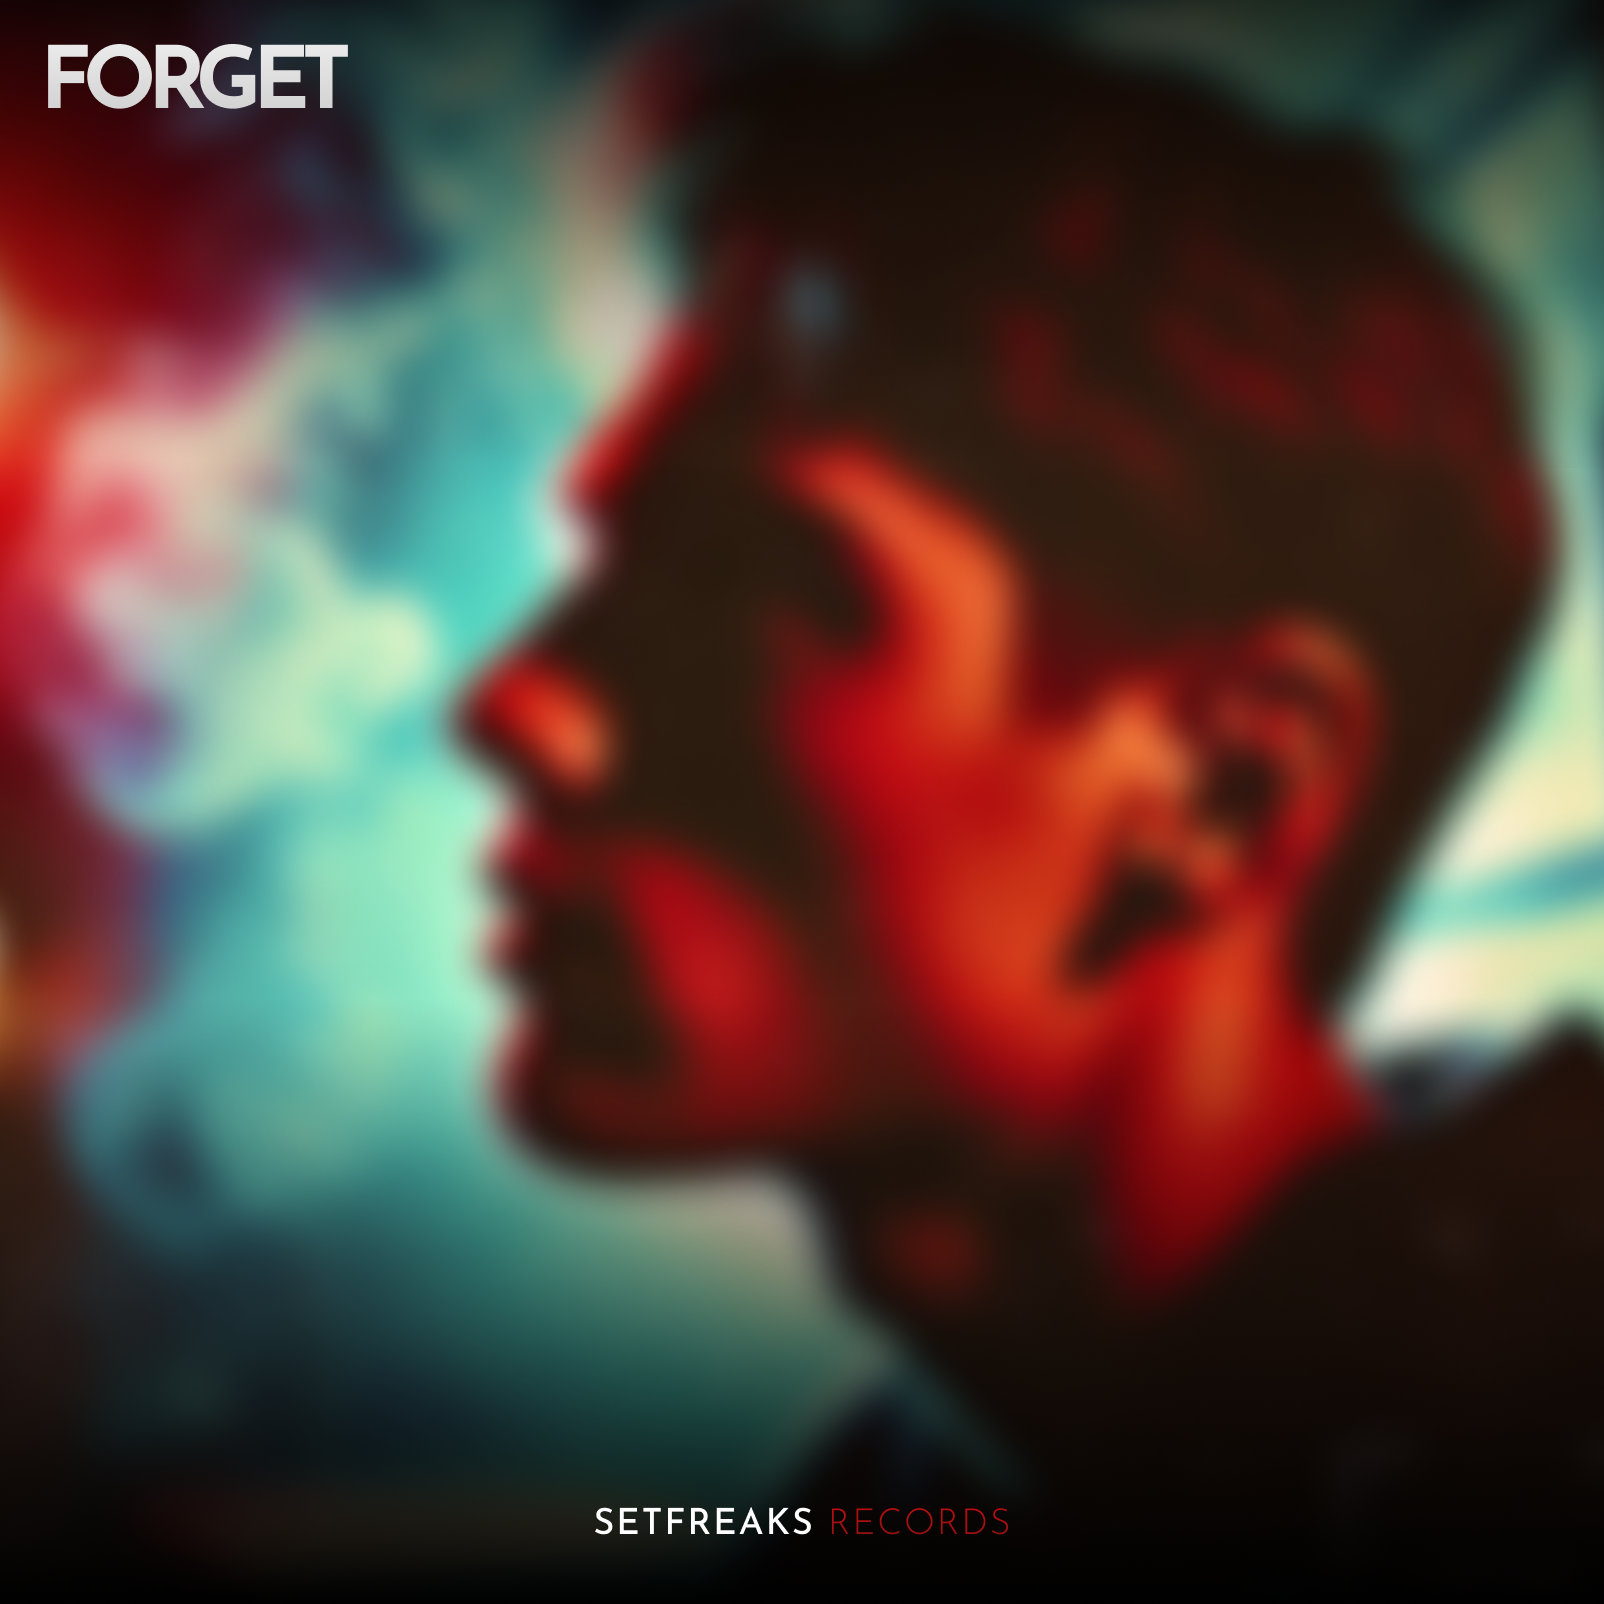 Forget